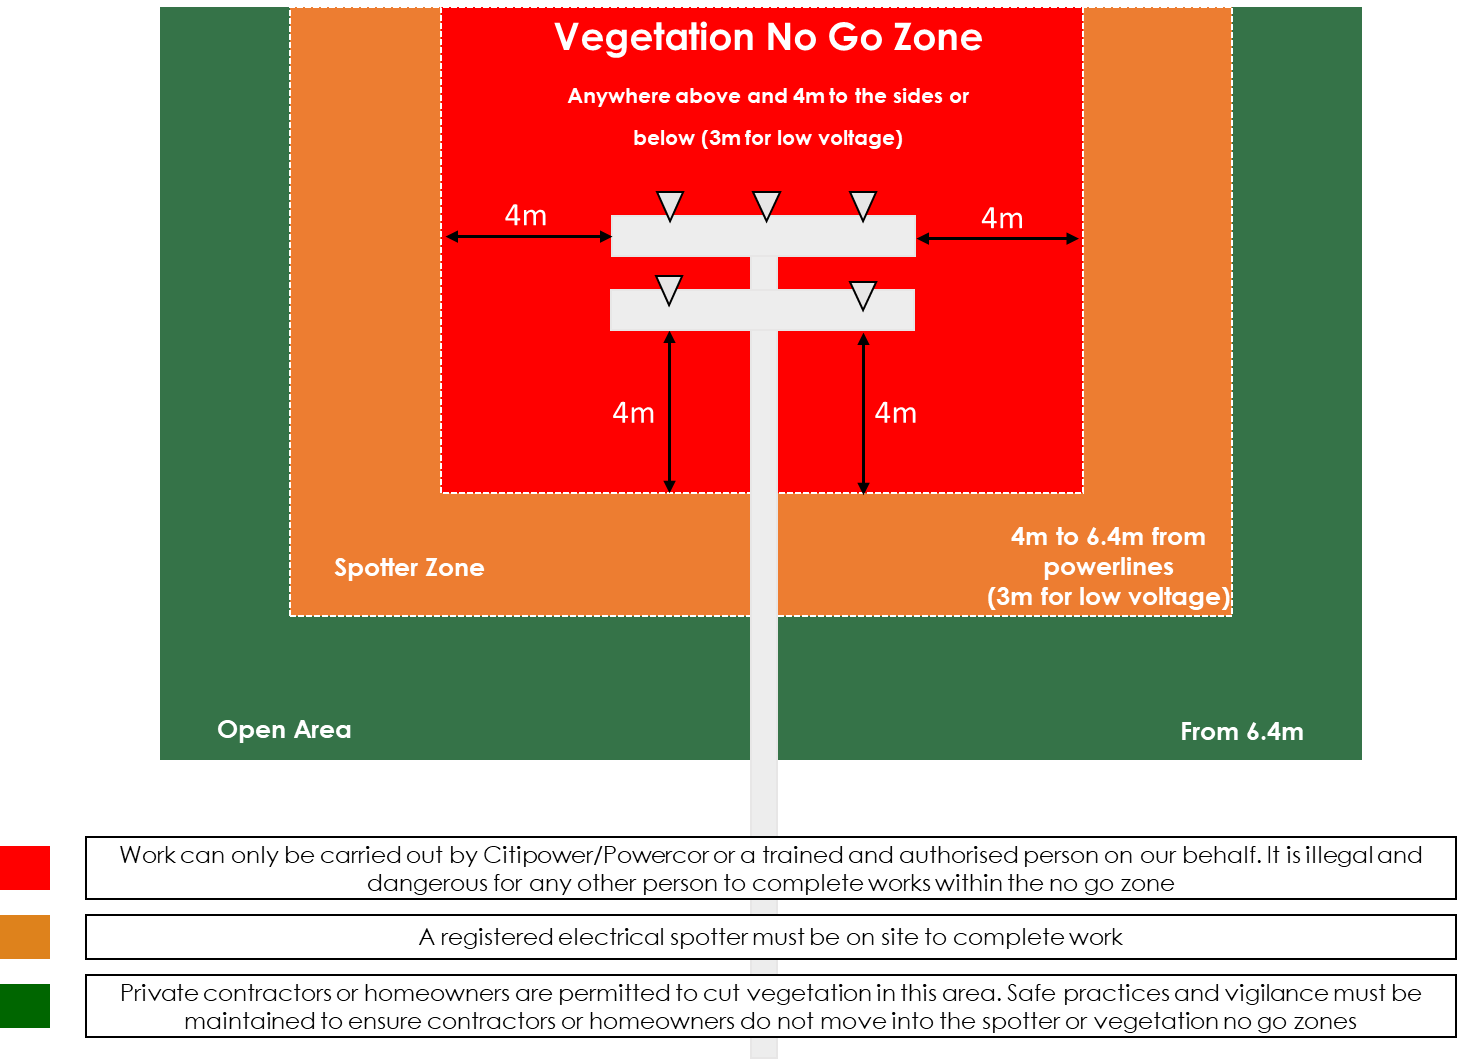 A diagram shows who is responsible for vegetation management around powerlines. The diagram is colour coded red for No Go Zone (Citipower and Powercor only), orange for registered electrical spotters, and green for homeowners. 